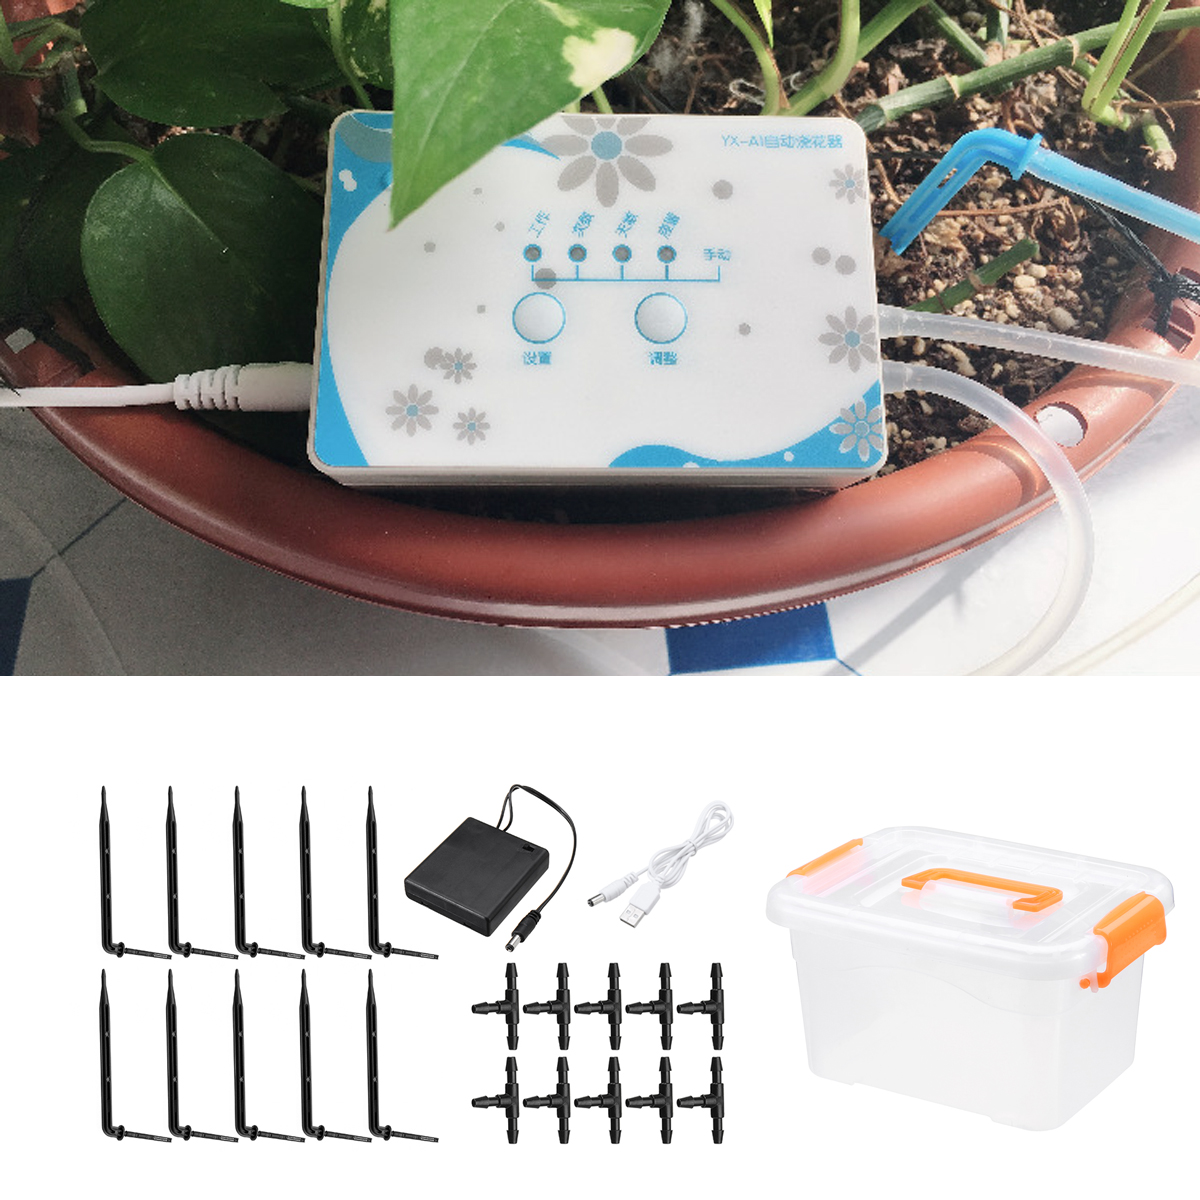 Drip-Irrigation-Watering-Timer-System-Adjustable-BatteryRechargeable-Controller-10m-Tube-1572080-1